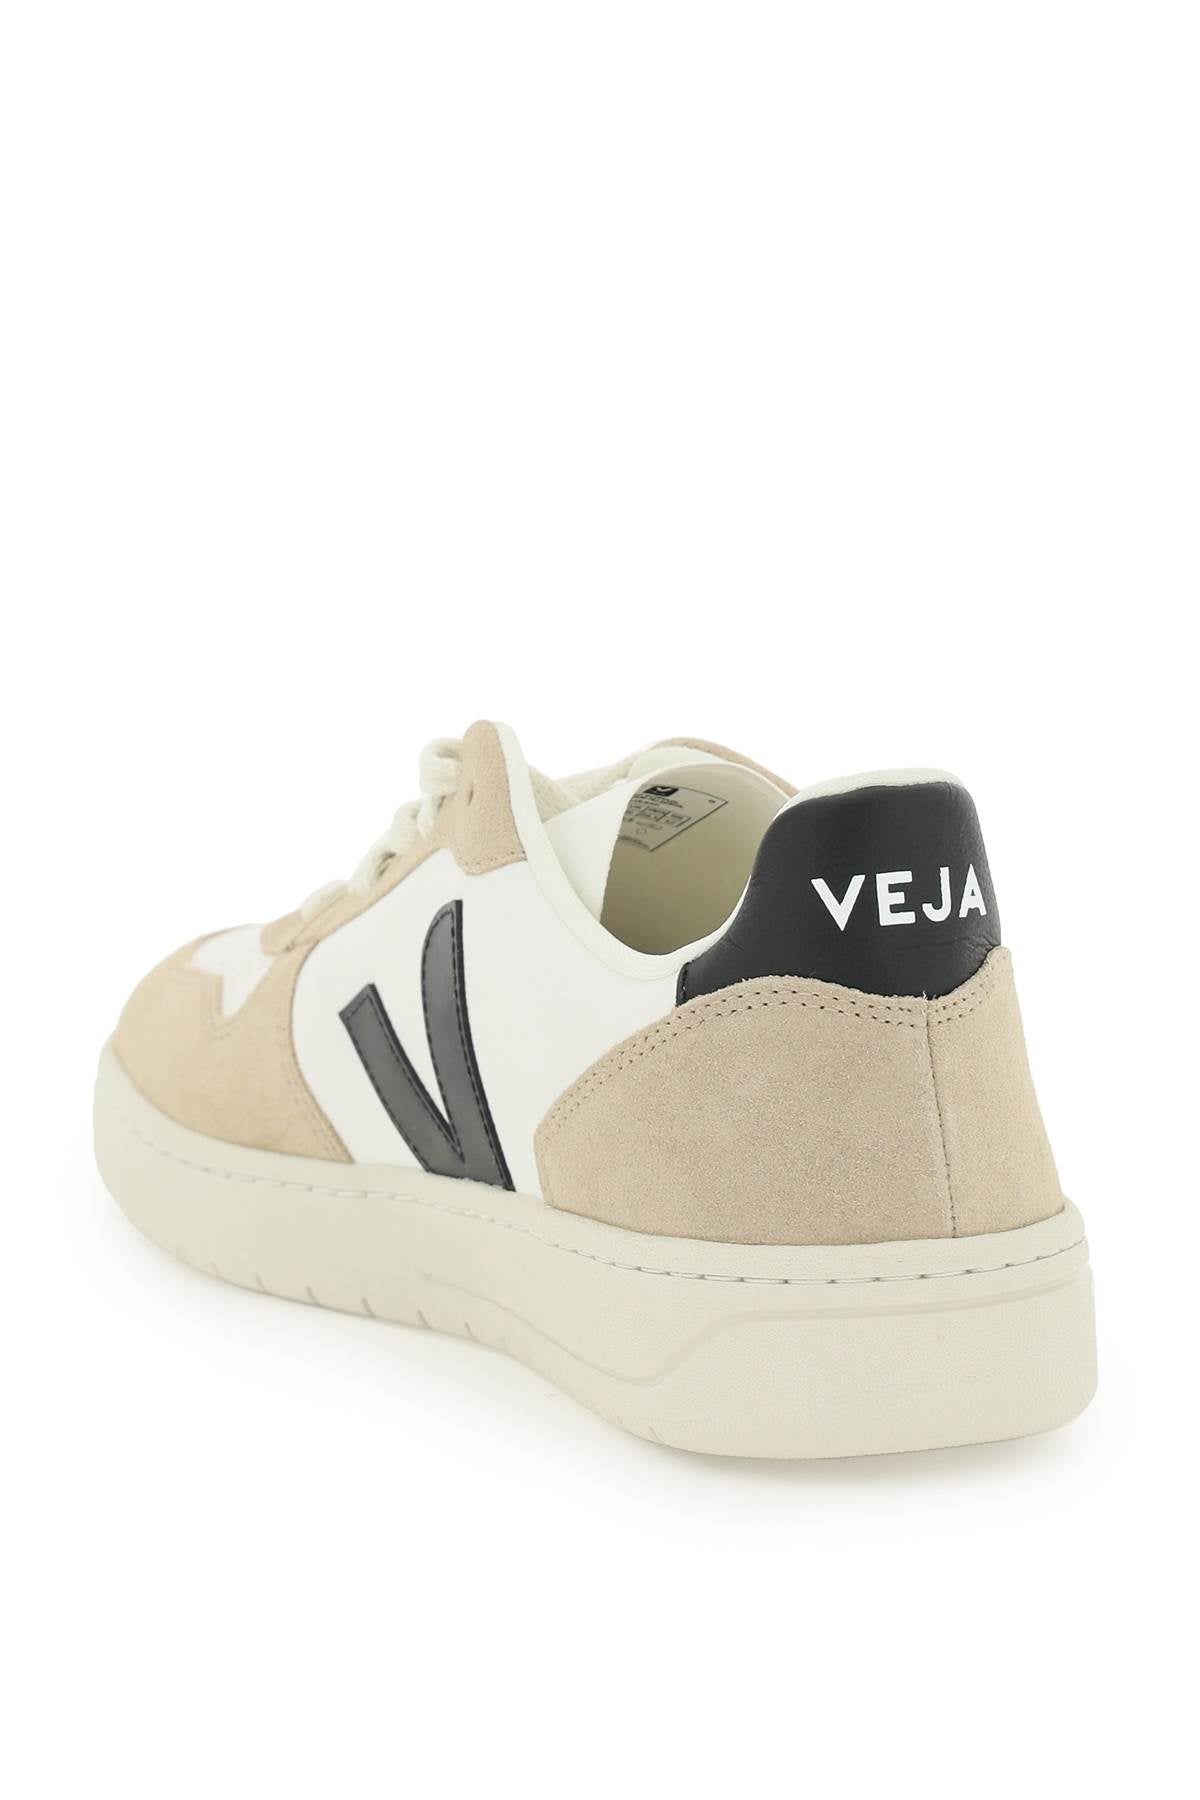 v-10 suede sneakers-2